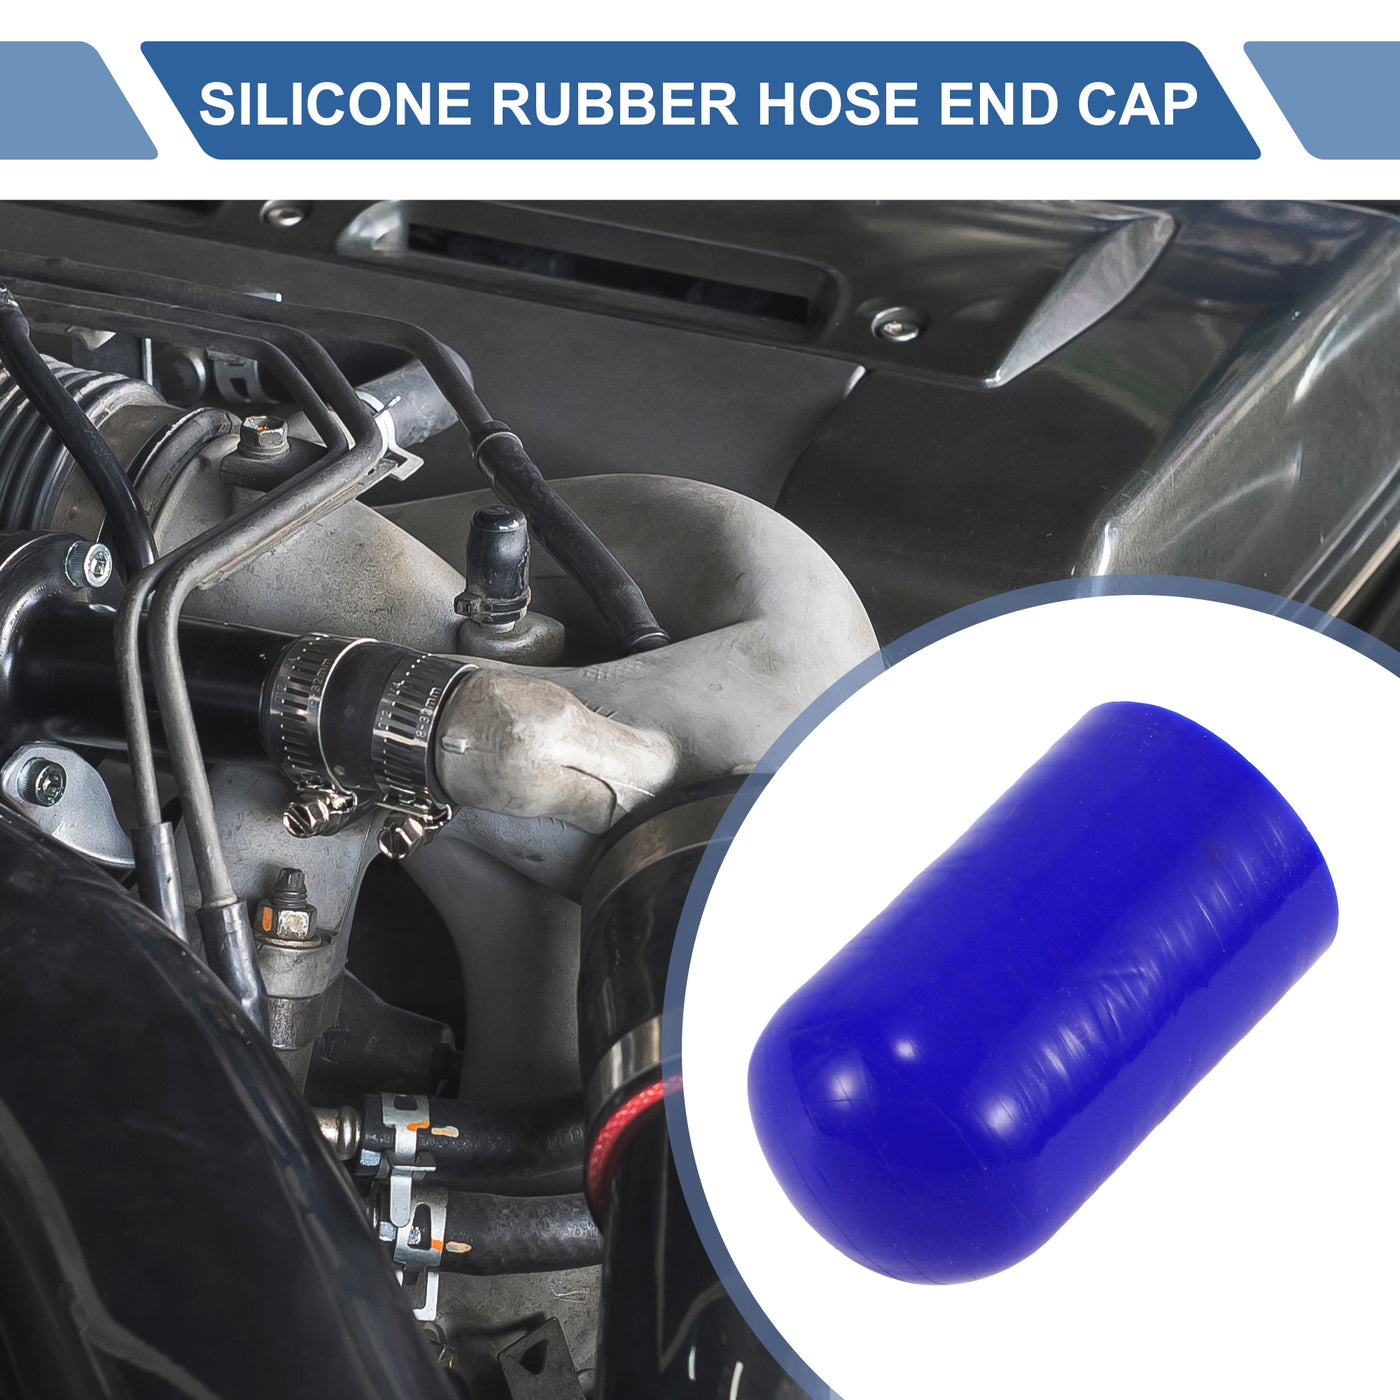 X AUTOHAUX 1 Pcs 60mm Length 35mm/1.38" ID Blue Car Silicone Rubber Hose End Cap with Clamp Silicone Reinforced Blanking Cap for Bypass Tube Universal